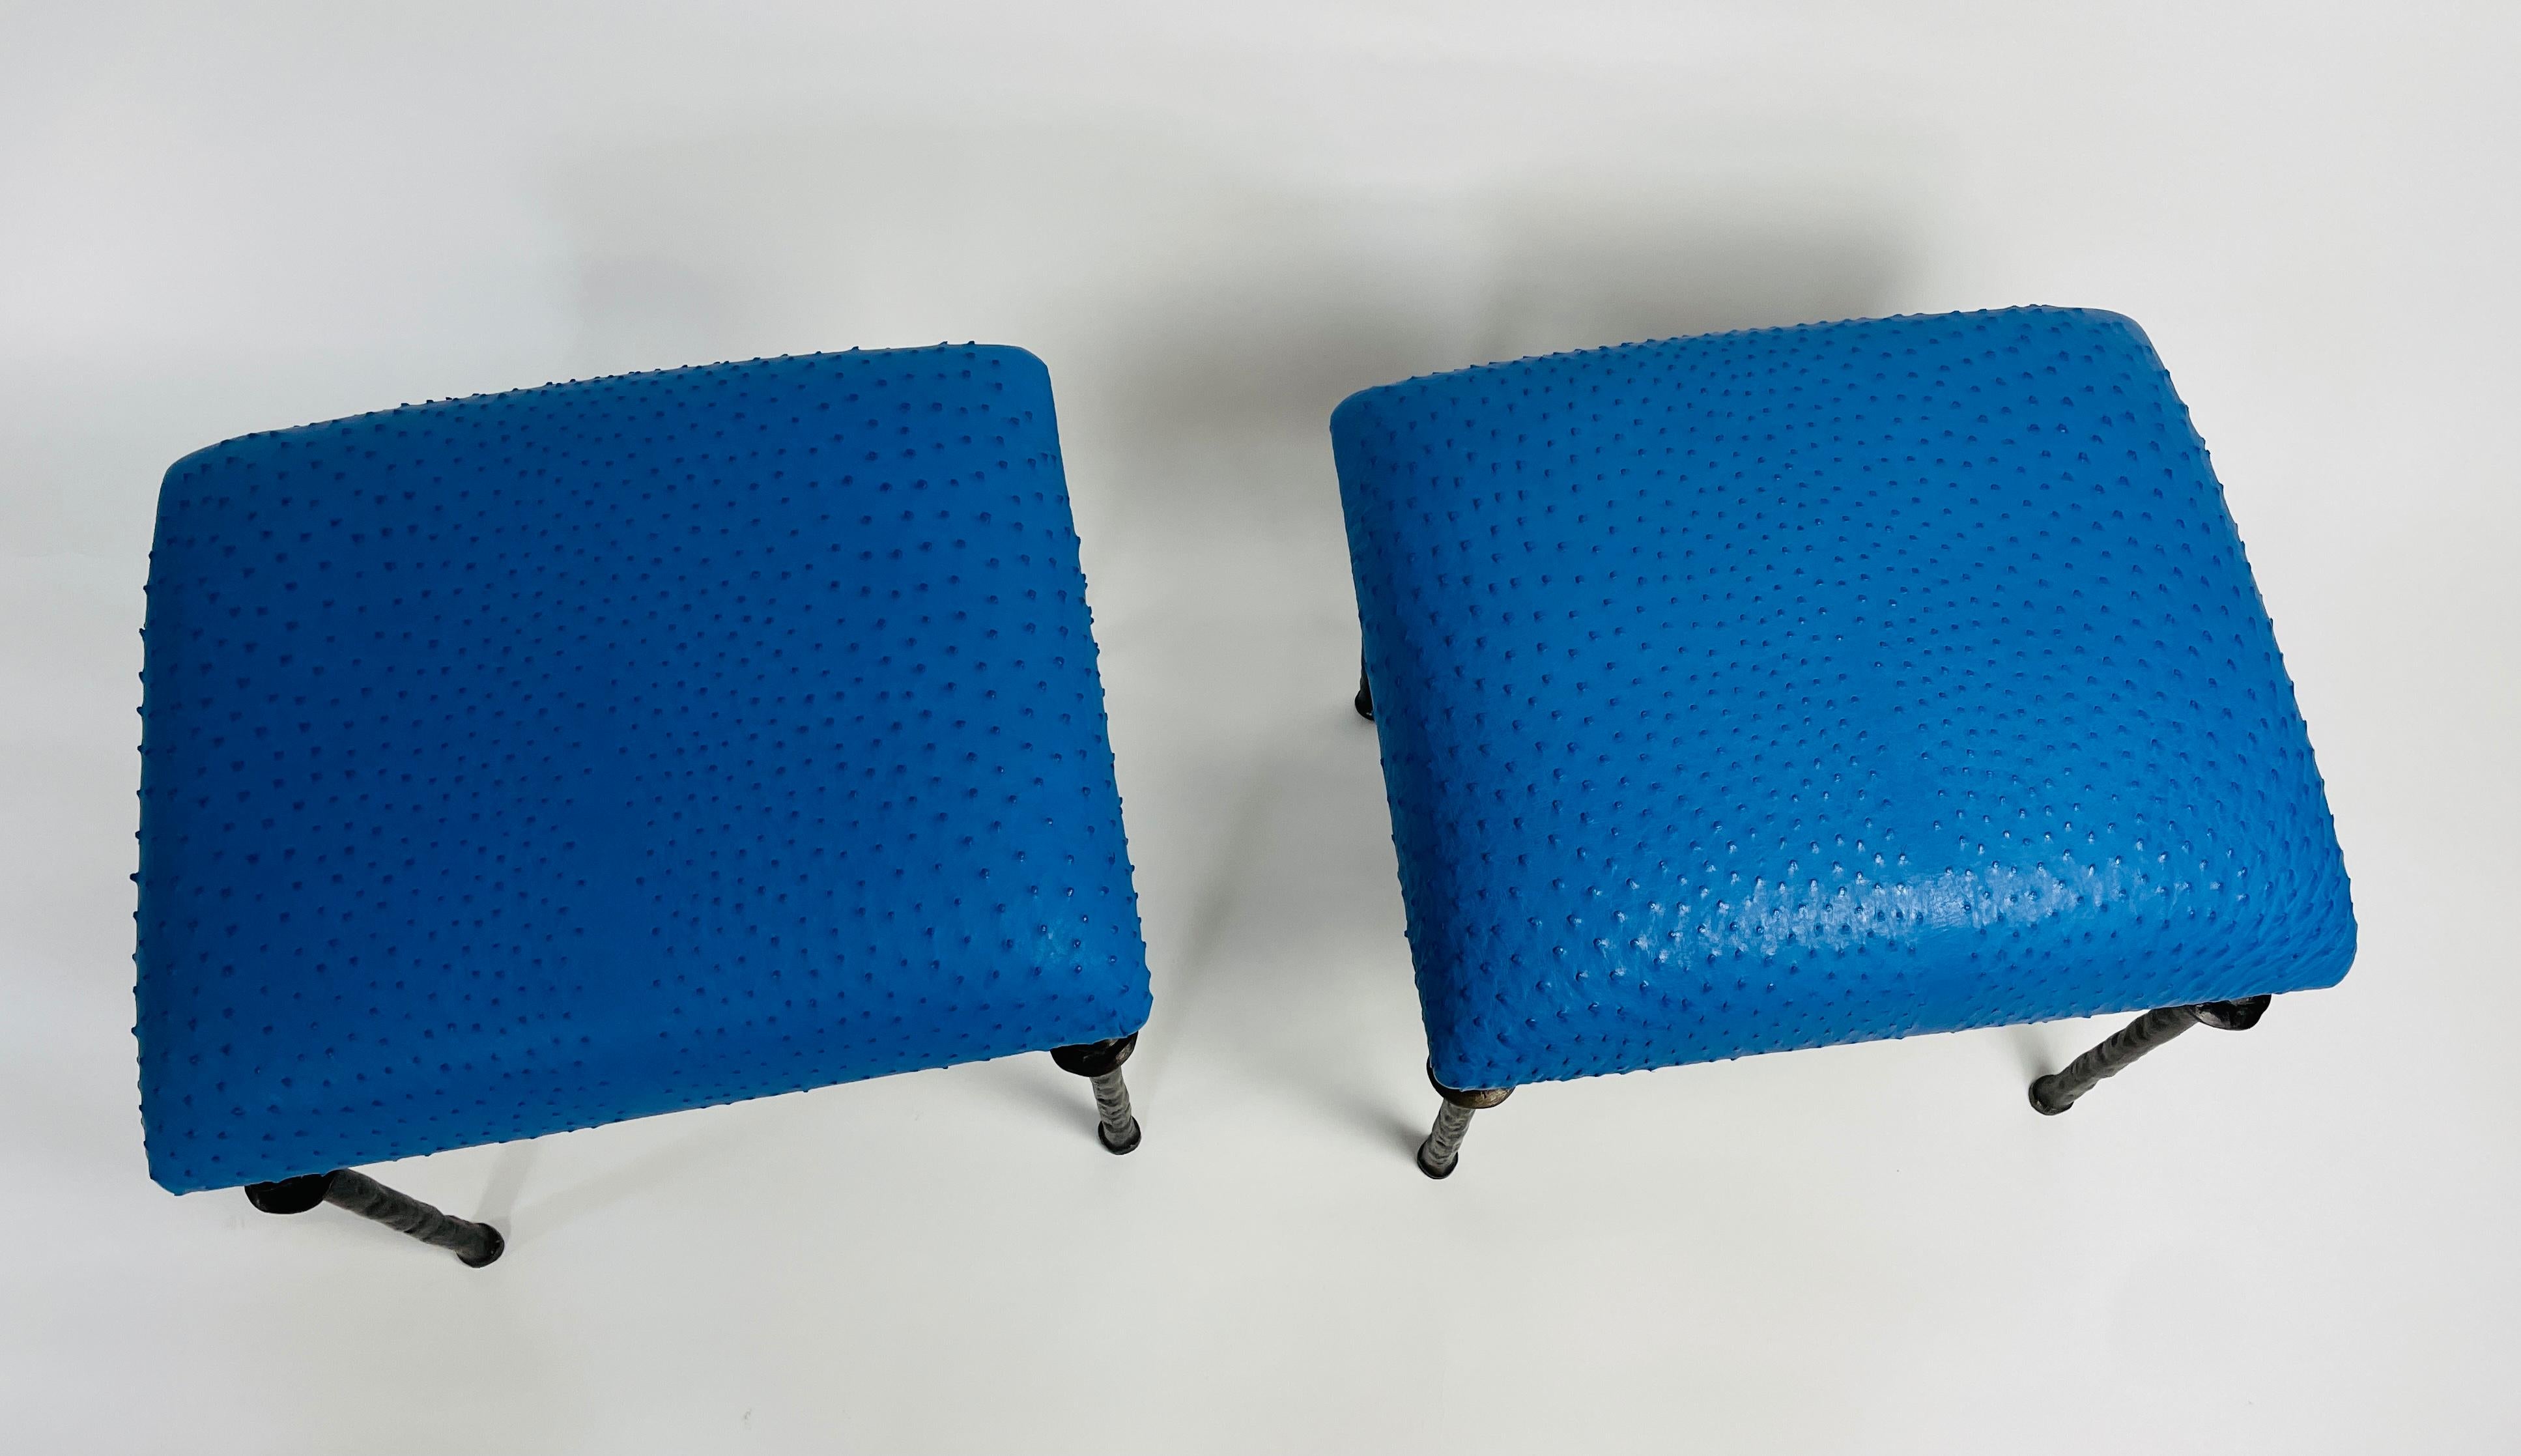 Pair of Sorgue Stools, by Bourgeois Boheme Atelier, Blue Ostrich Leather For Sale 1